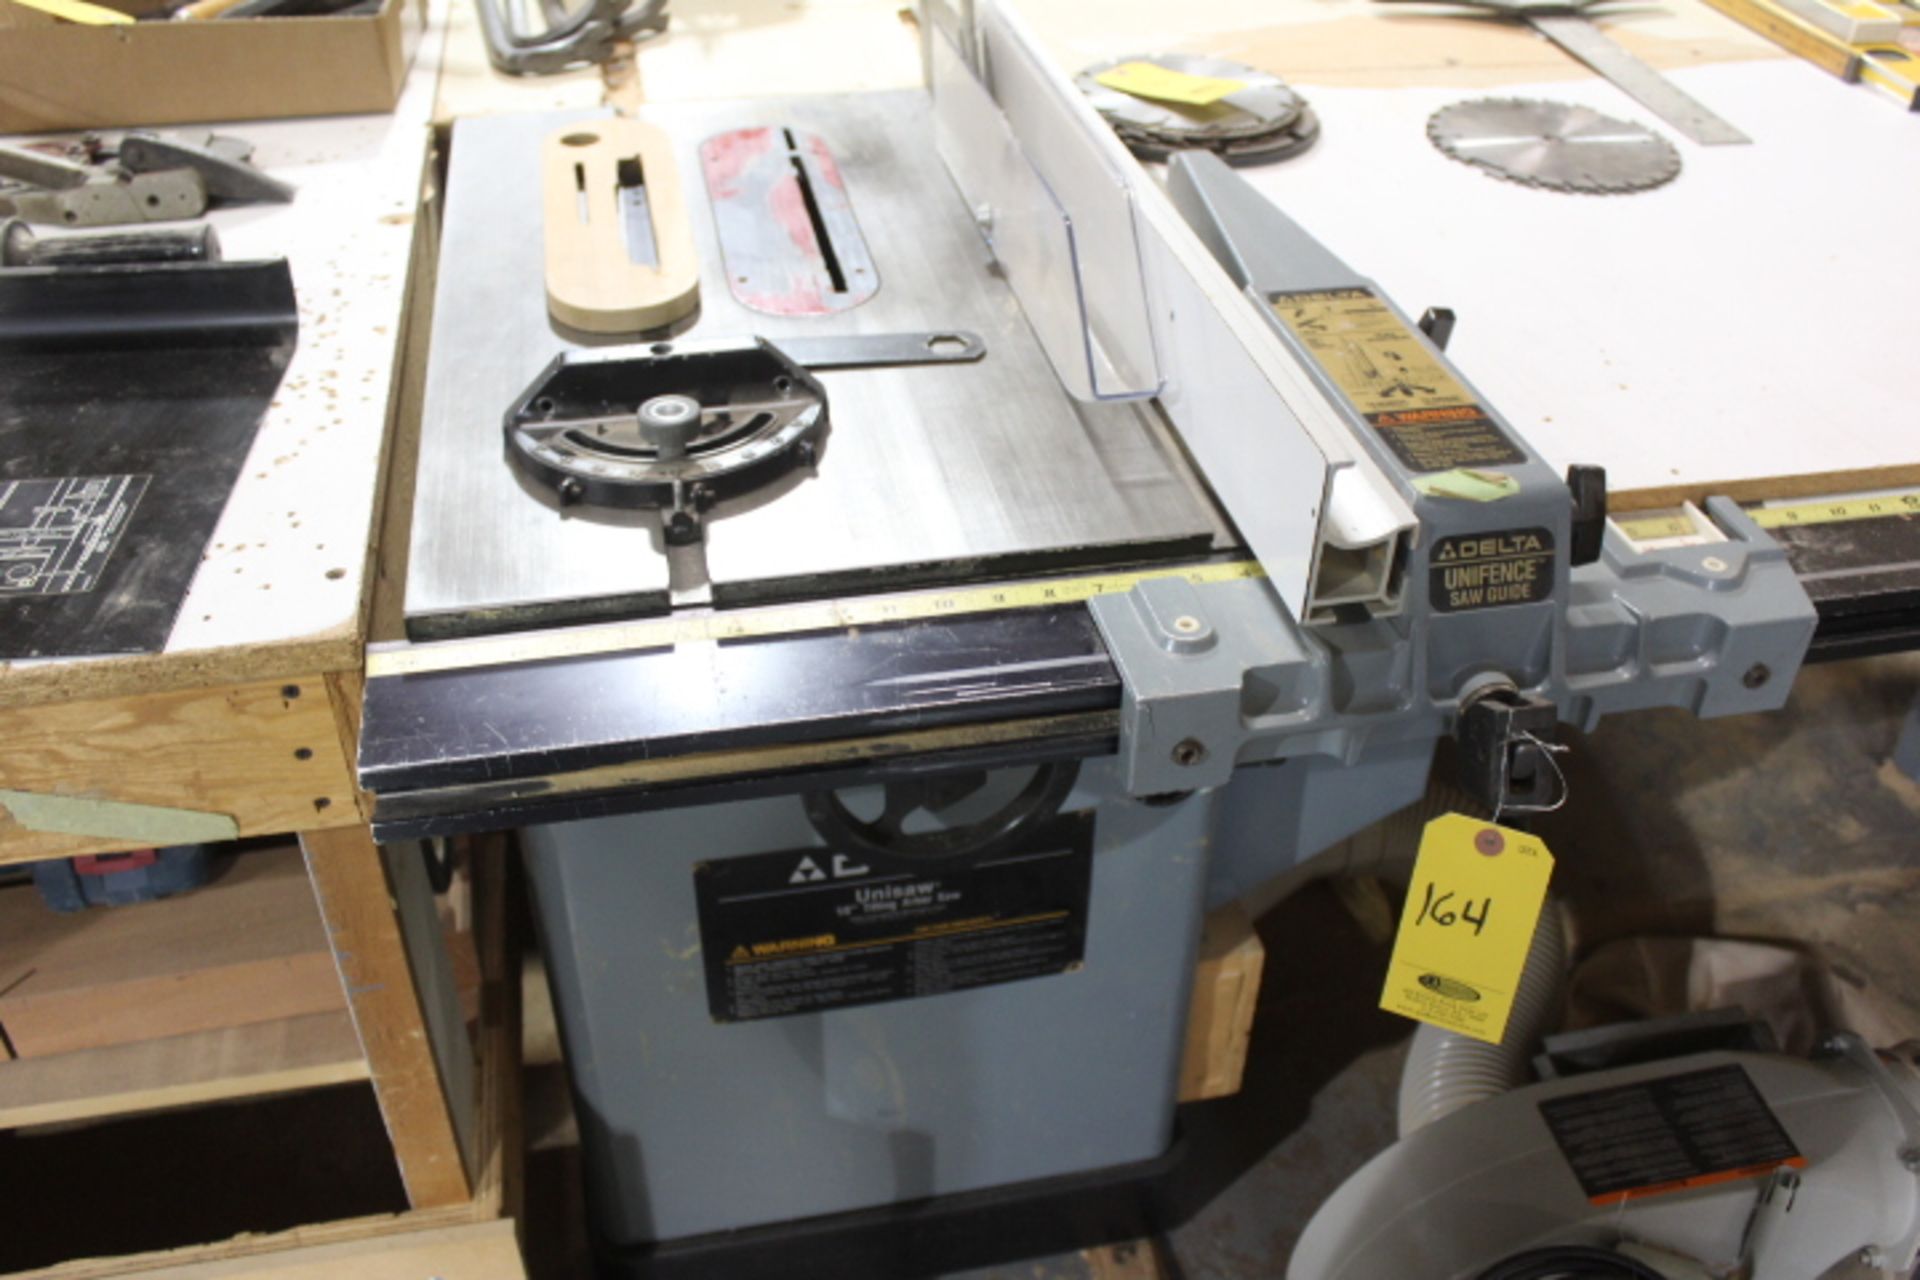 DELTA UNISAW 10IN. TILTING ARBOR TABLE SAW, UNIFENCE, (LOADING FEE-$100) - Image 3 of 3